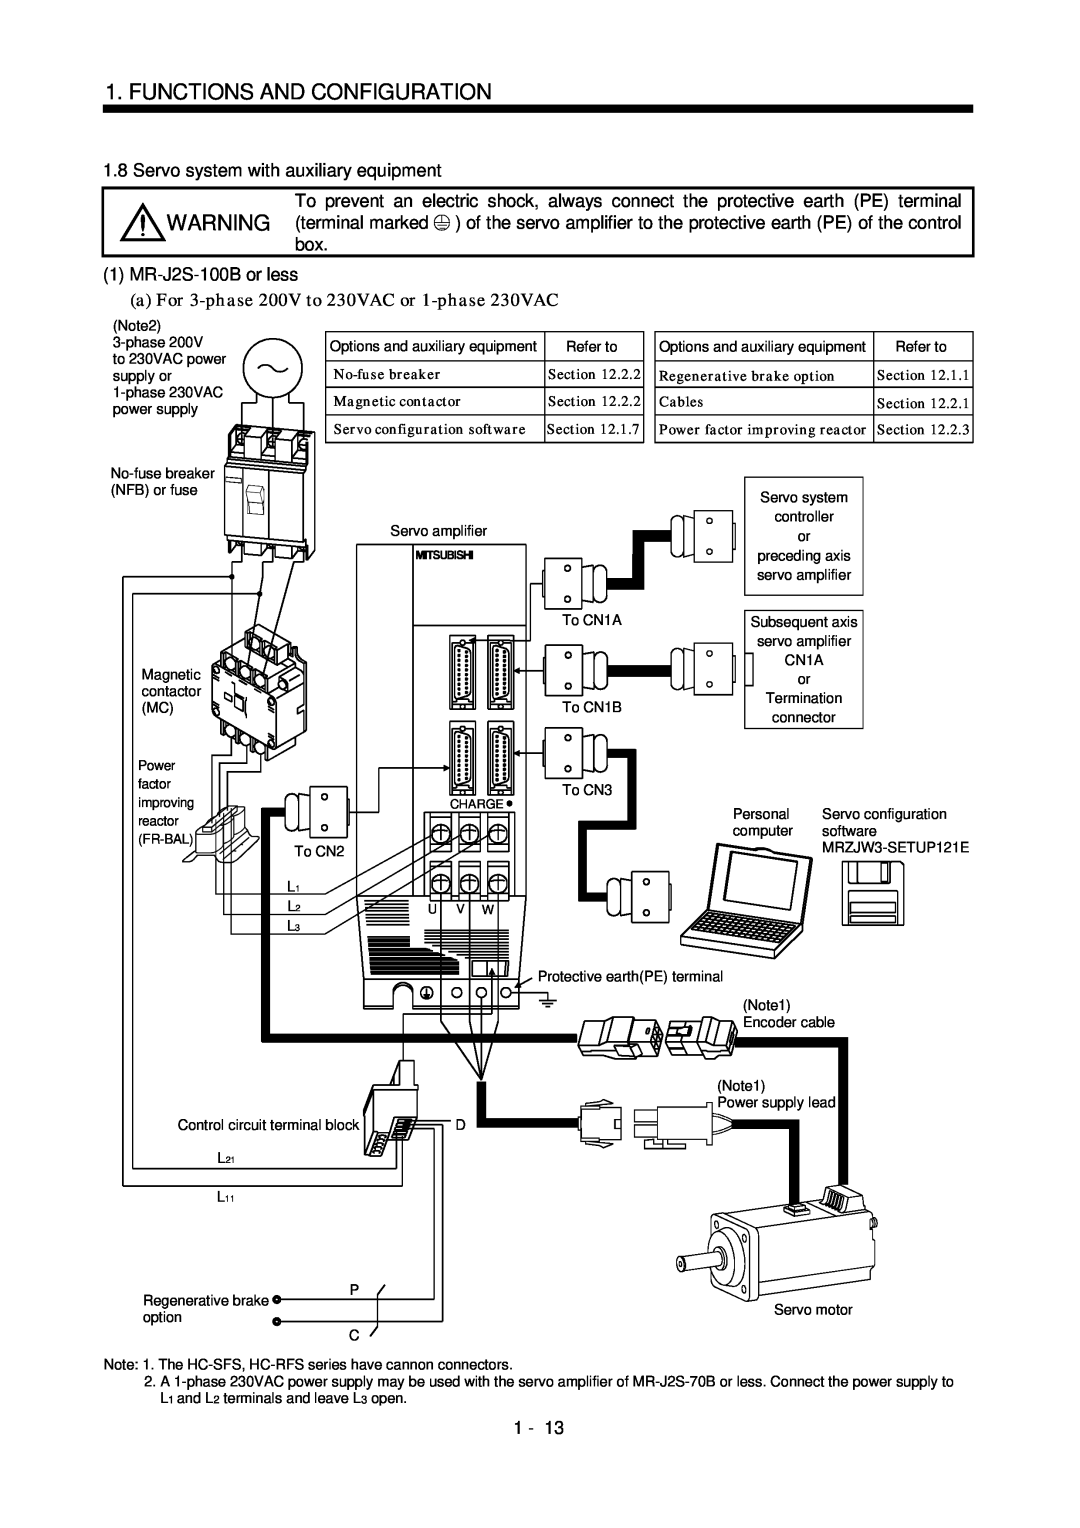 Bose MR-J2S- B Servo system with auxiliary equipment, box 1MR-J2S-100Bor less, Functions And Configuration 